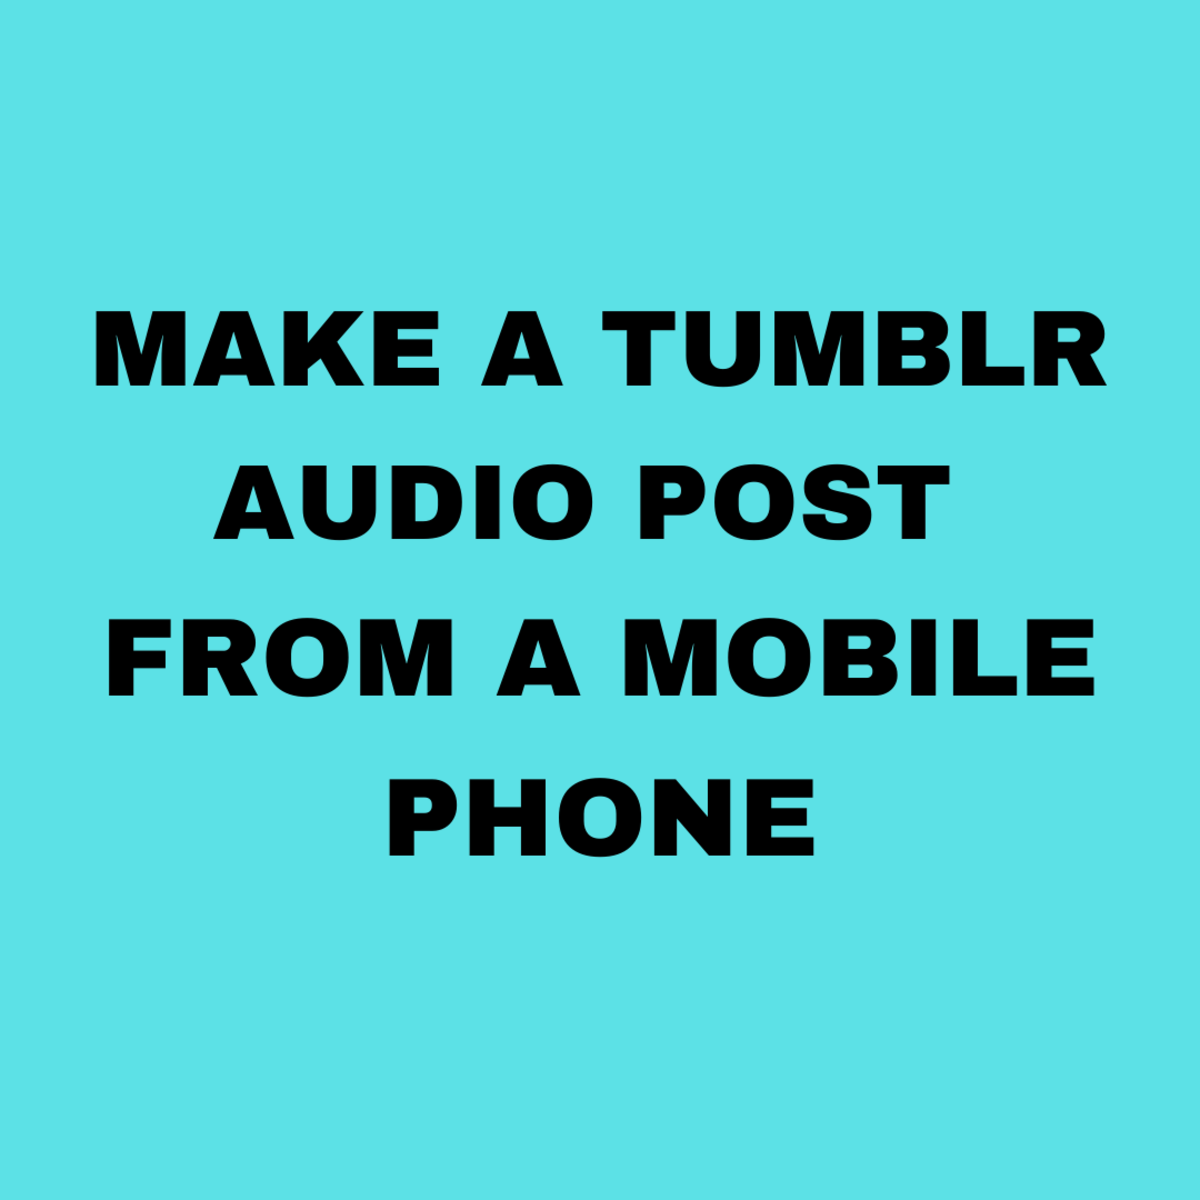 how-to-make-a-tumblr-audio-post-from-a-mobile-phone